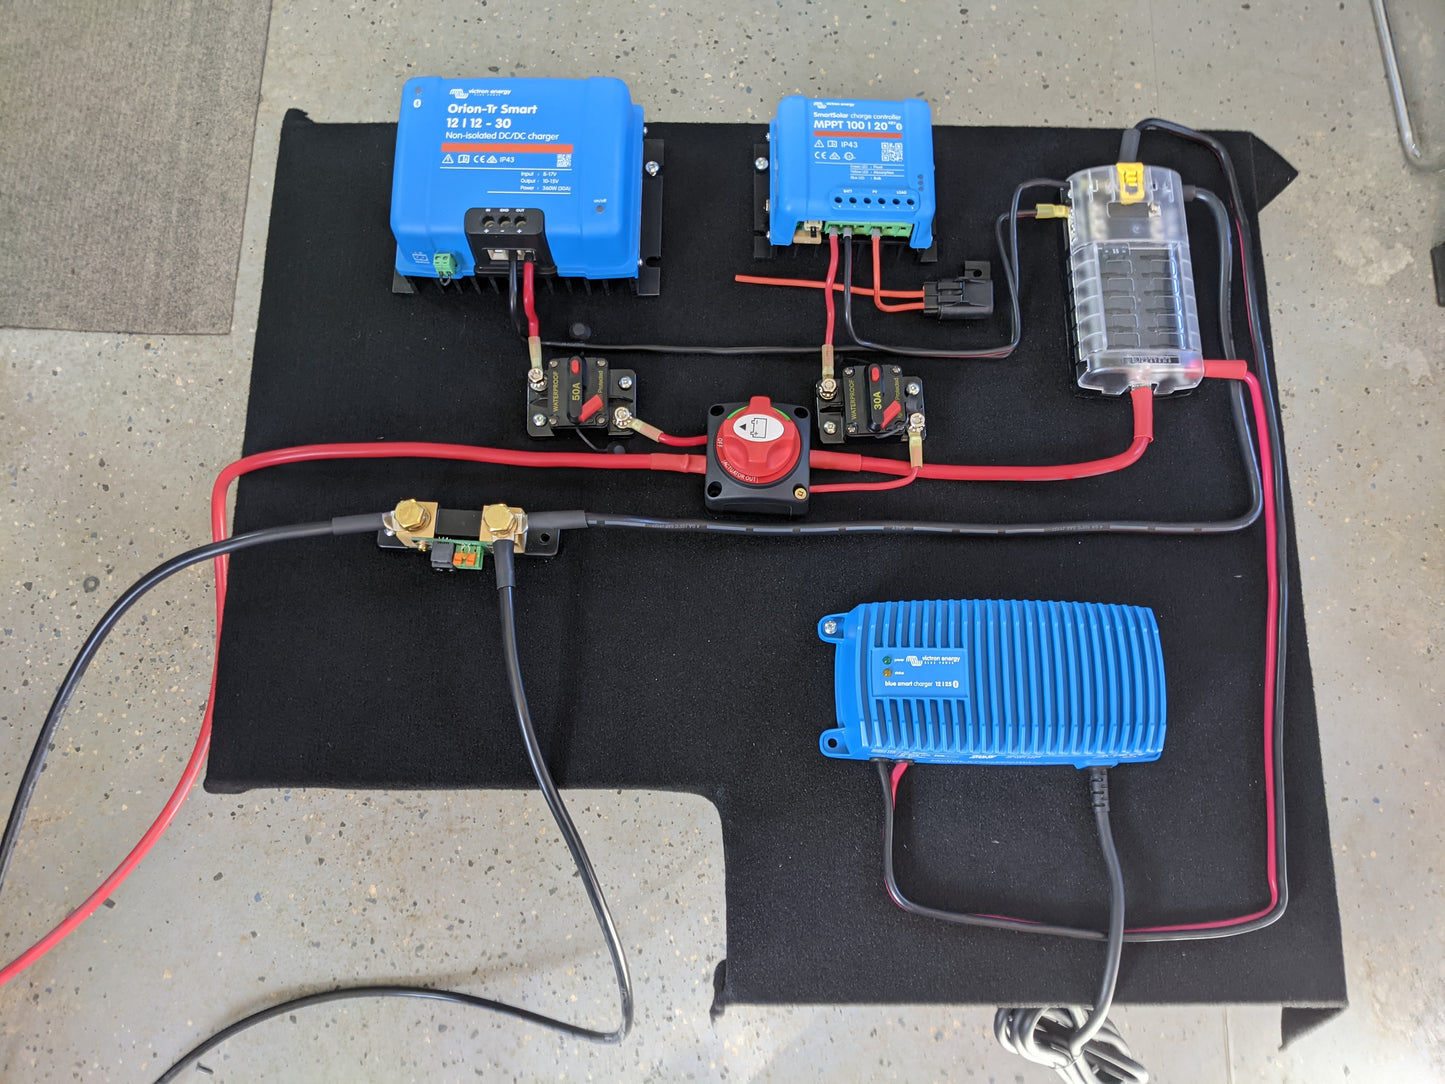 RV Mobile Power System, System Check